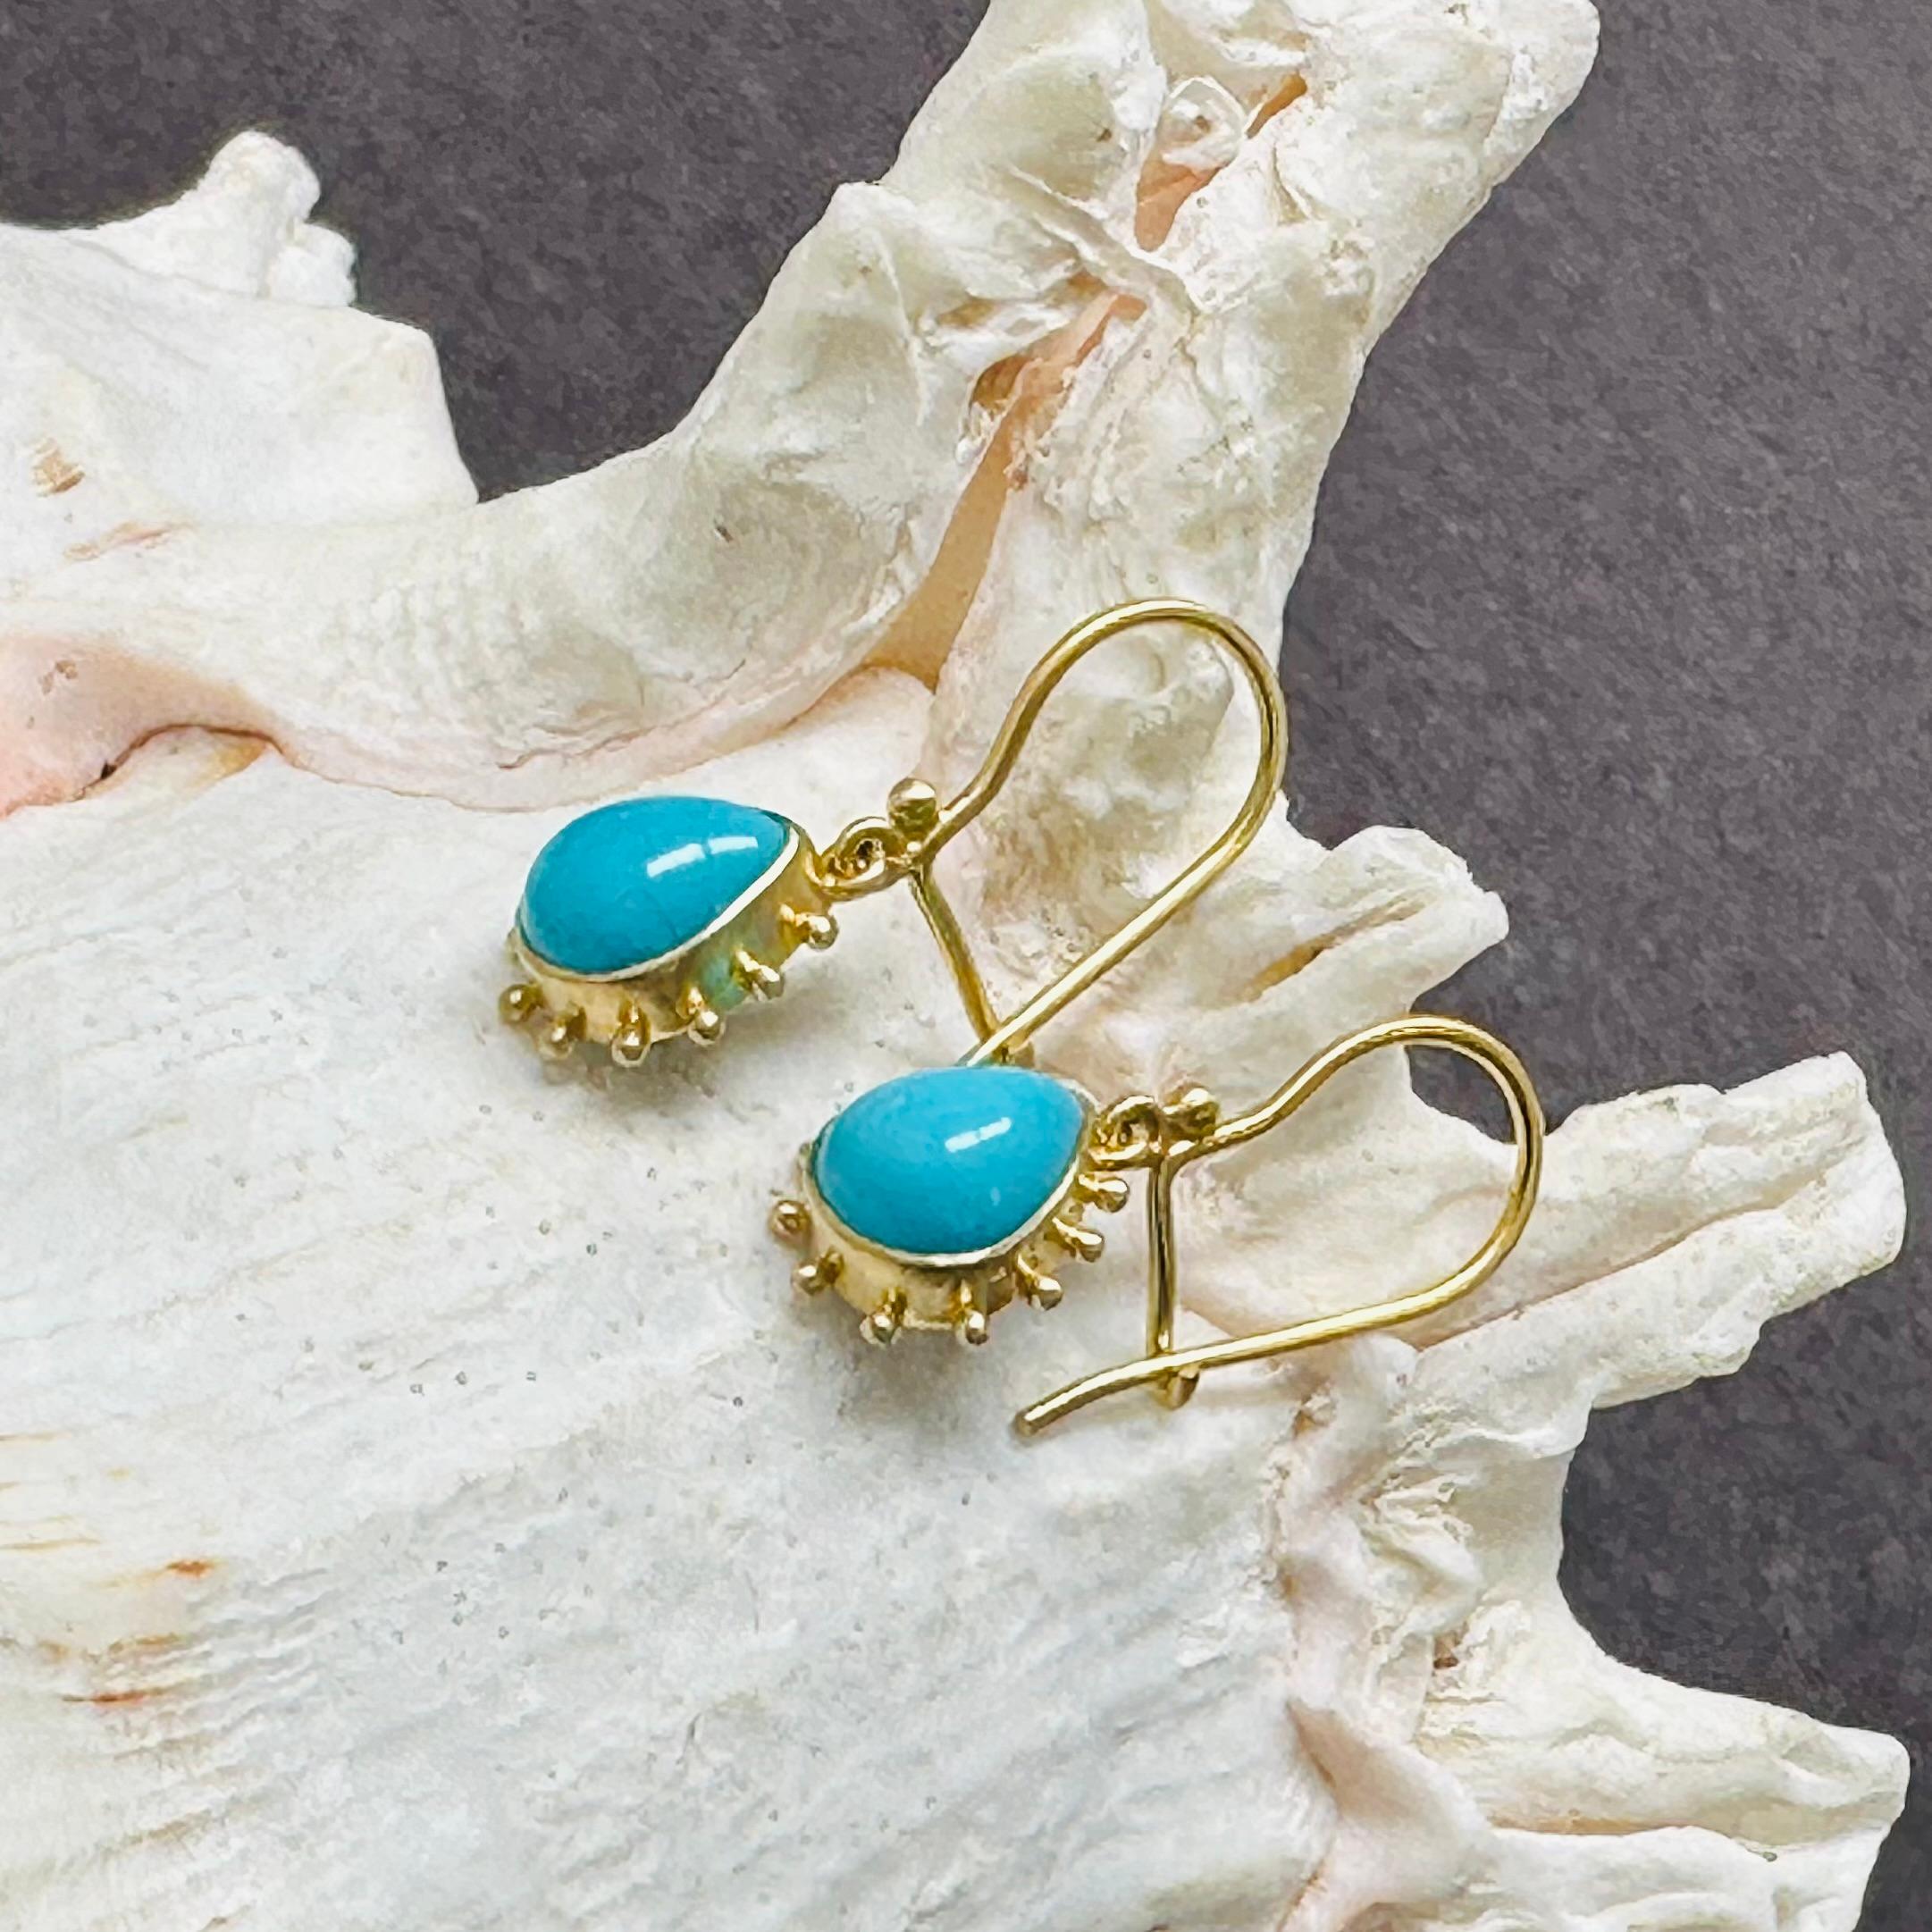 3.3 Carats Sleeping Beauty Turquoise 18k Gold Wire Earrings In New Condition For Sale In Soquel, CA